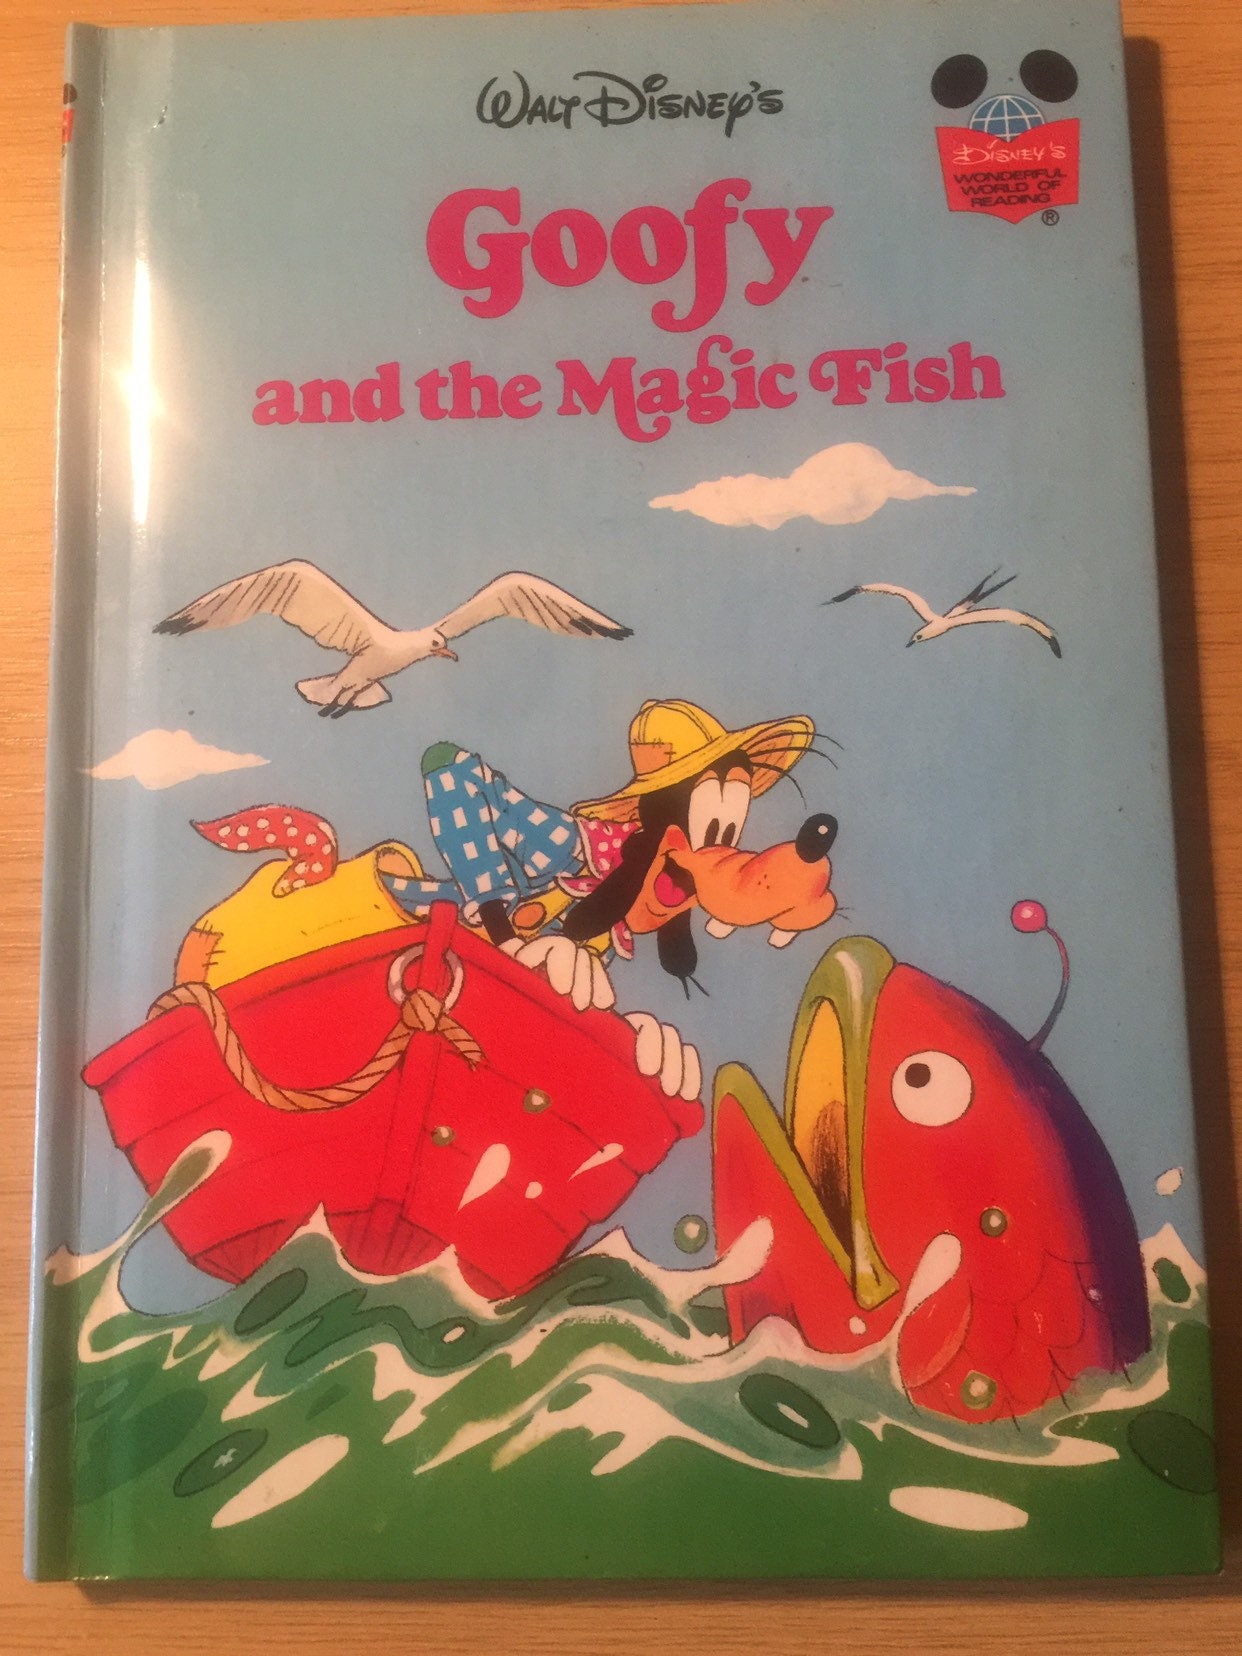 Vintage 1979 First Edition Goofy and the Magic Fish' Walt Disney's